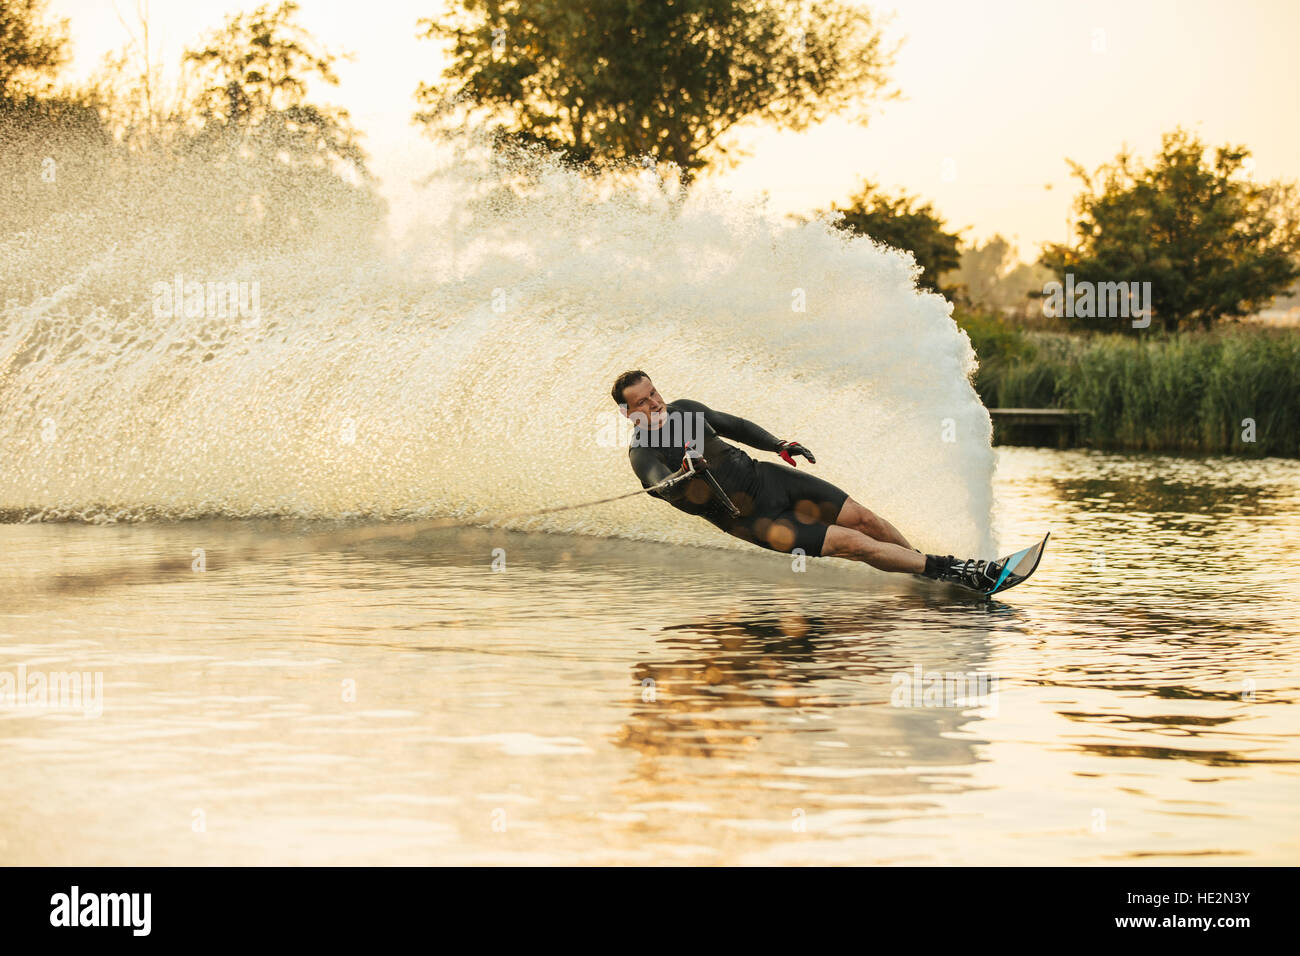 Man show of his water skiing skill on a lake. Athlete doing stunts on wakeboard. Stock Photo